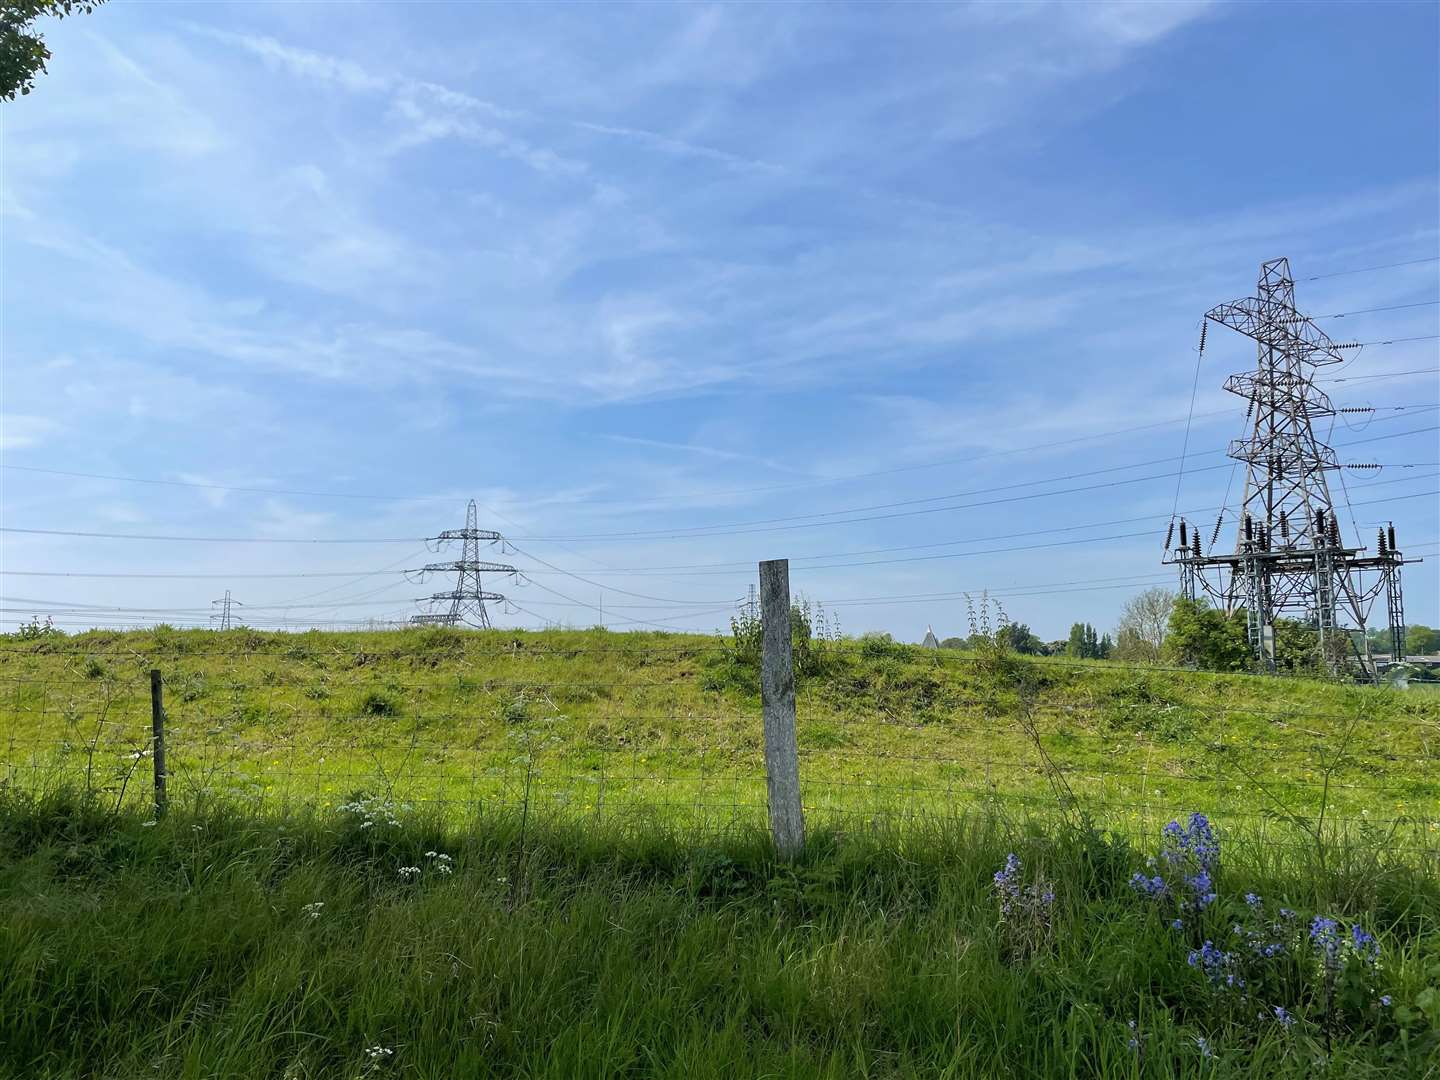 The proposed site for the battery storage system